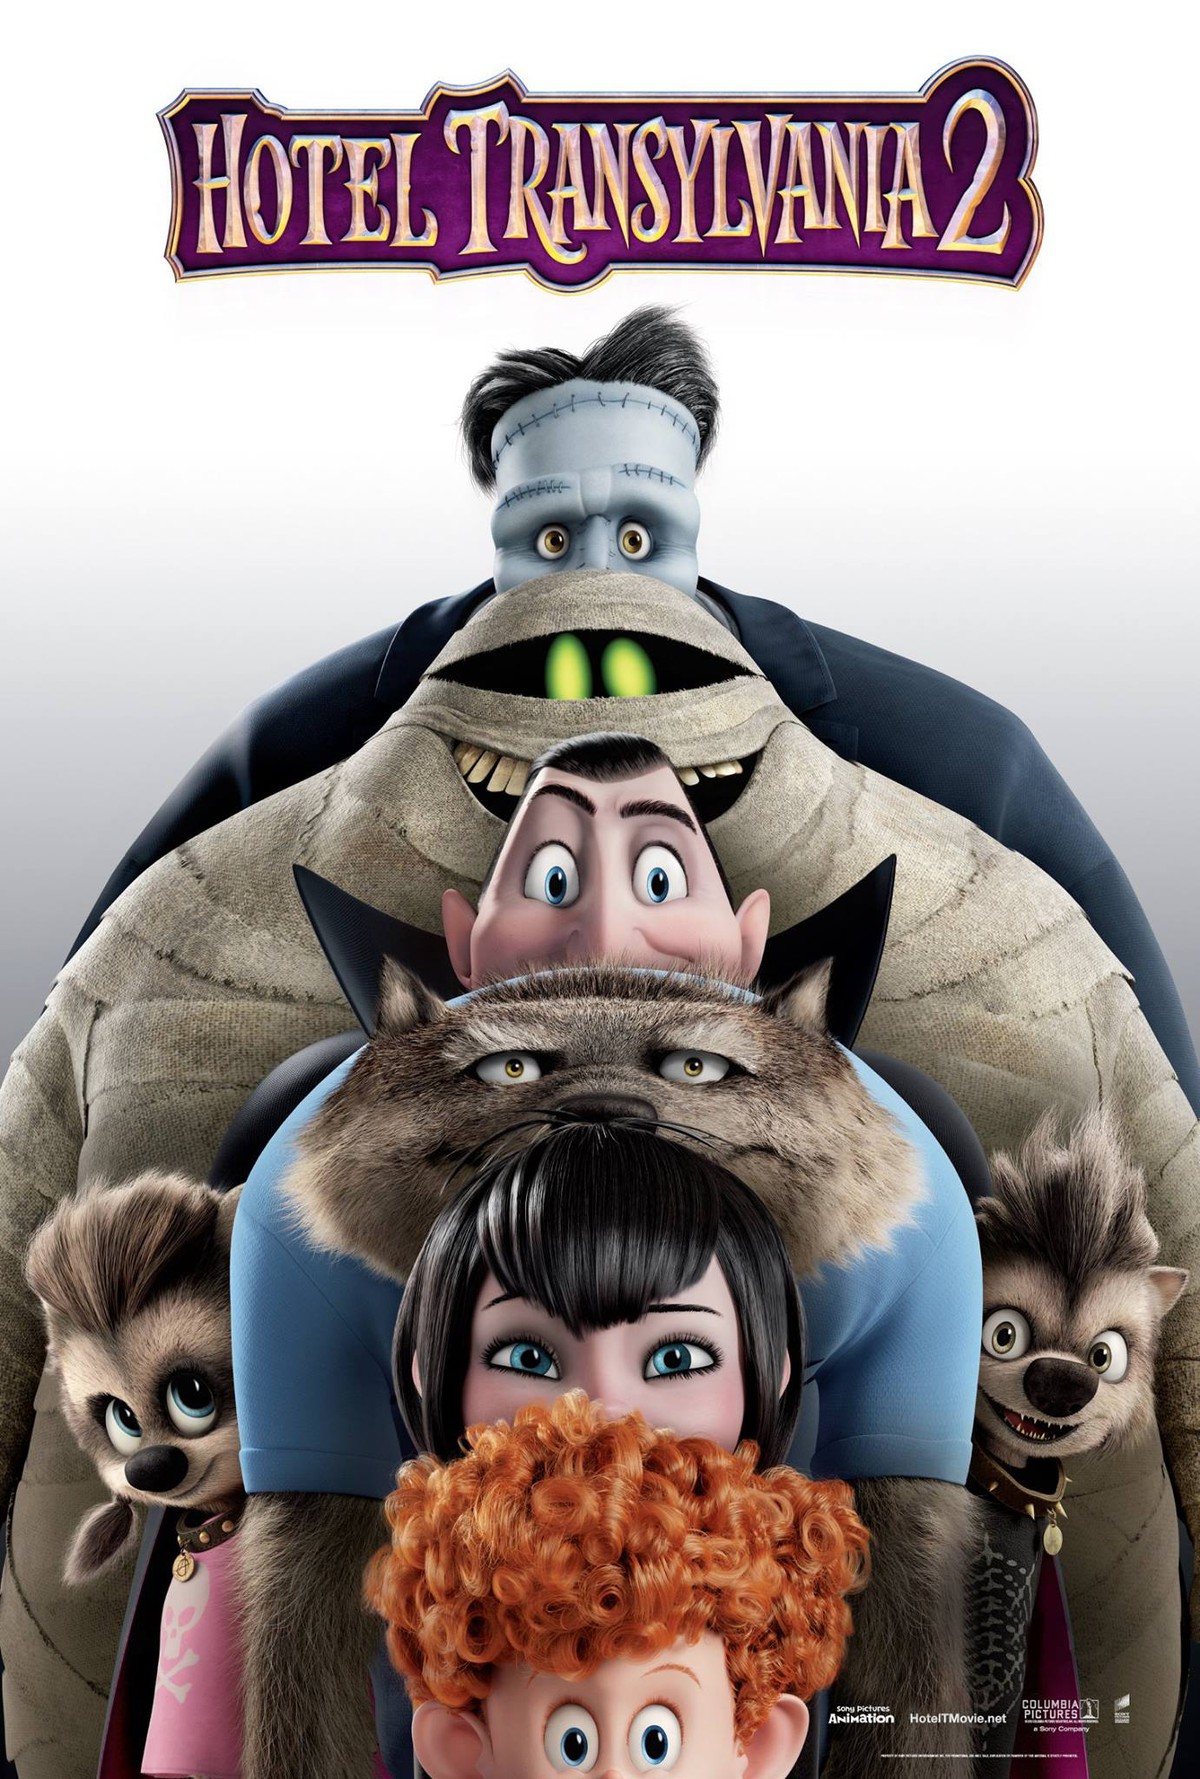 A New Poster For HOTEL TRANSYLVANIA 2!!